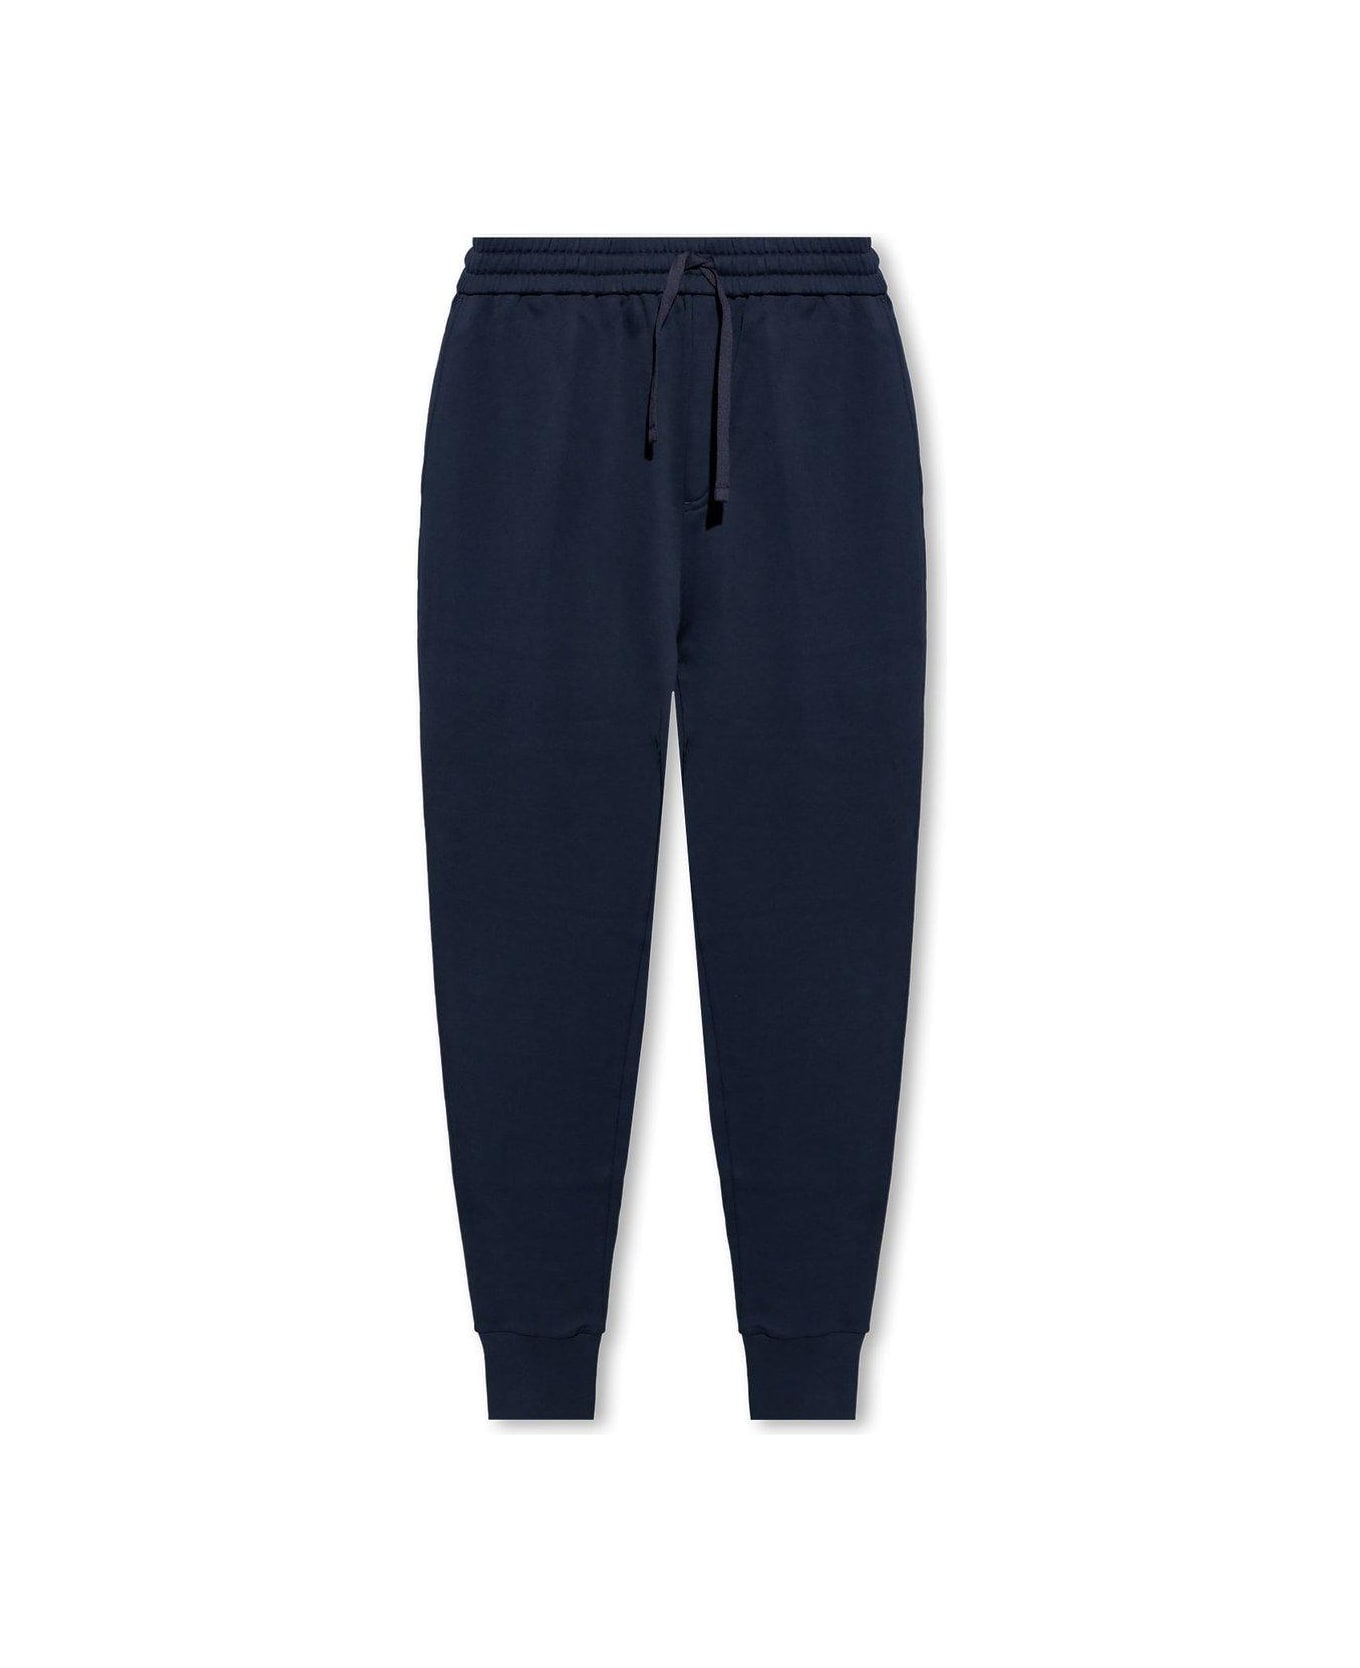 Etro Logo Embroidered Drawstring Tapered Track Pants - NAVY